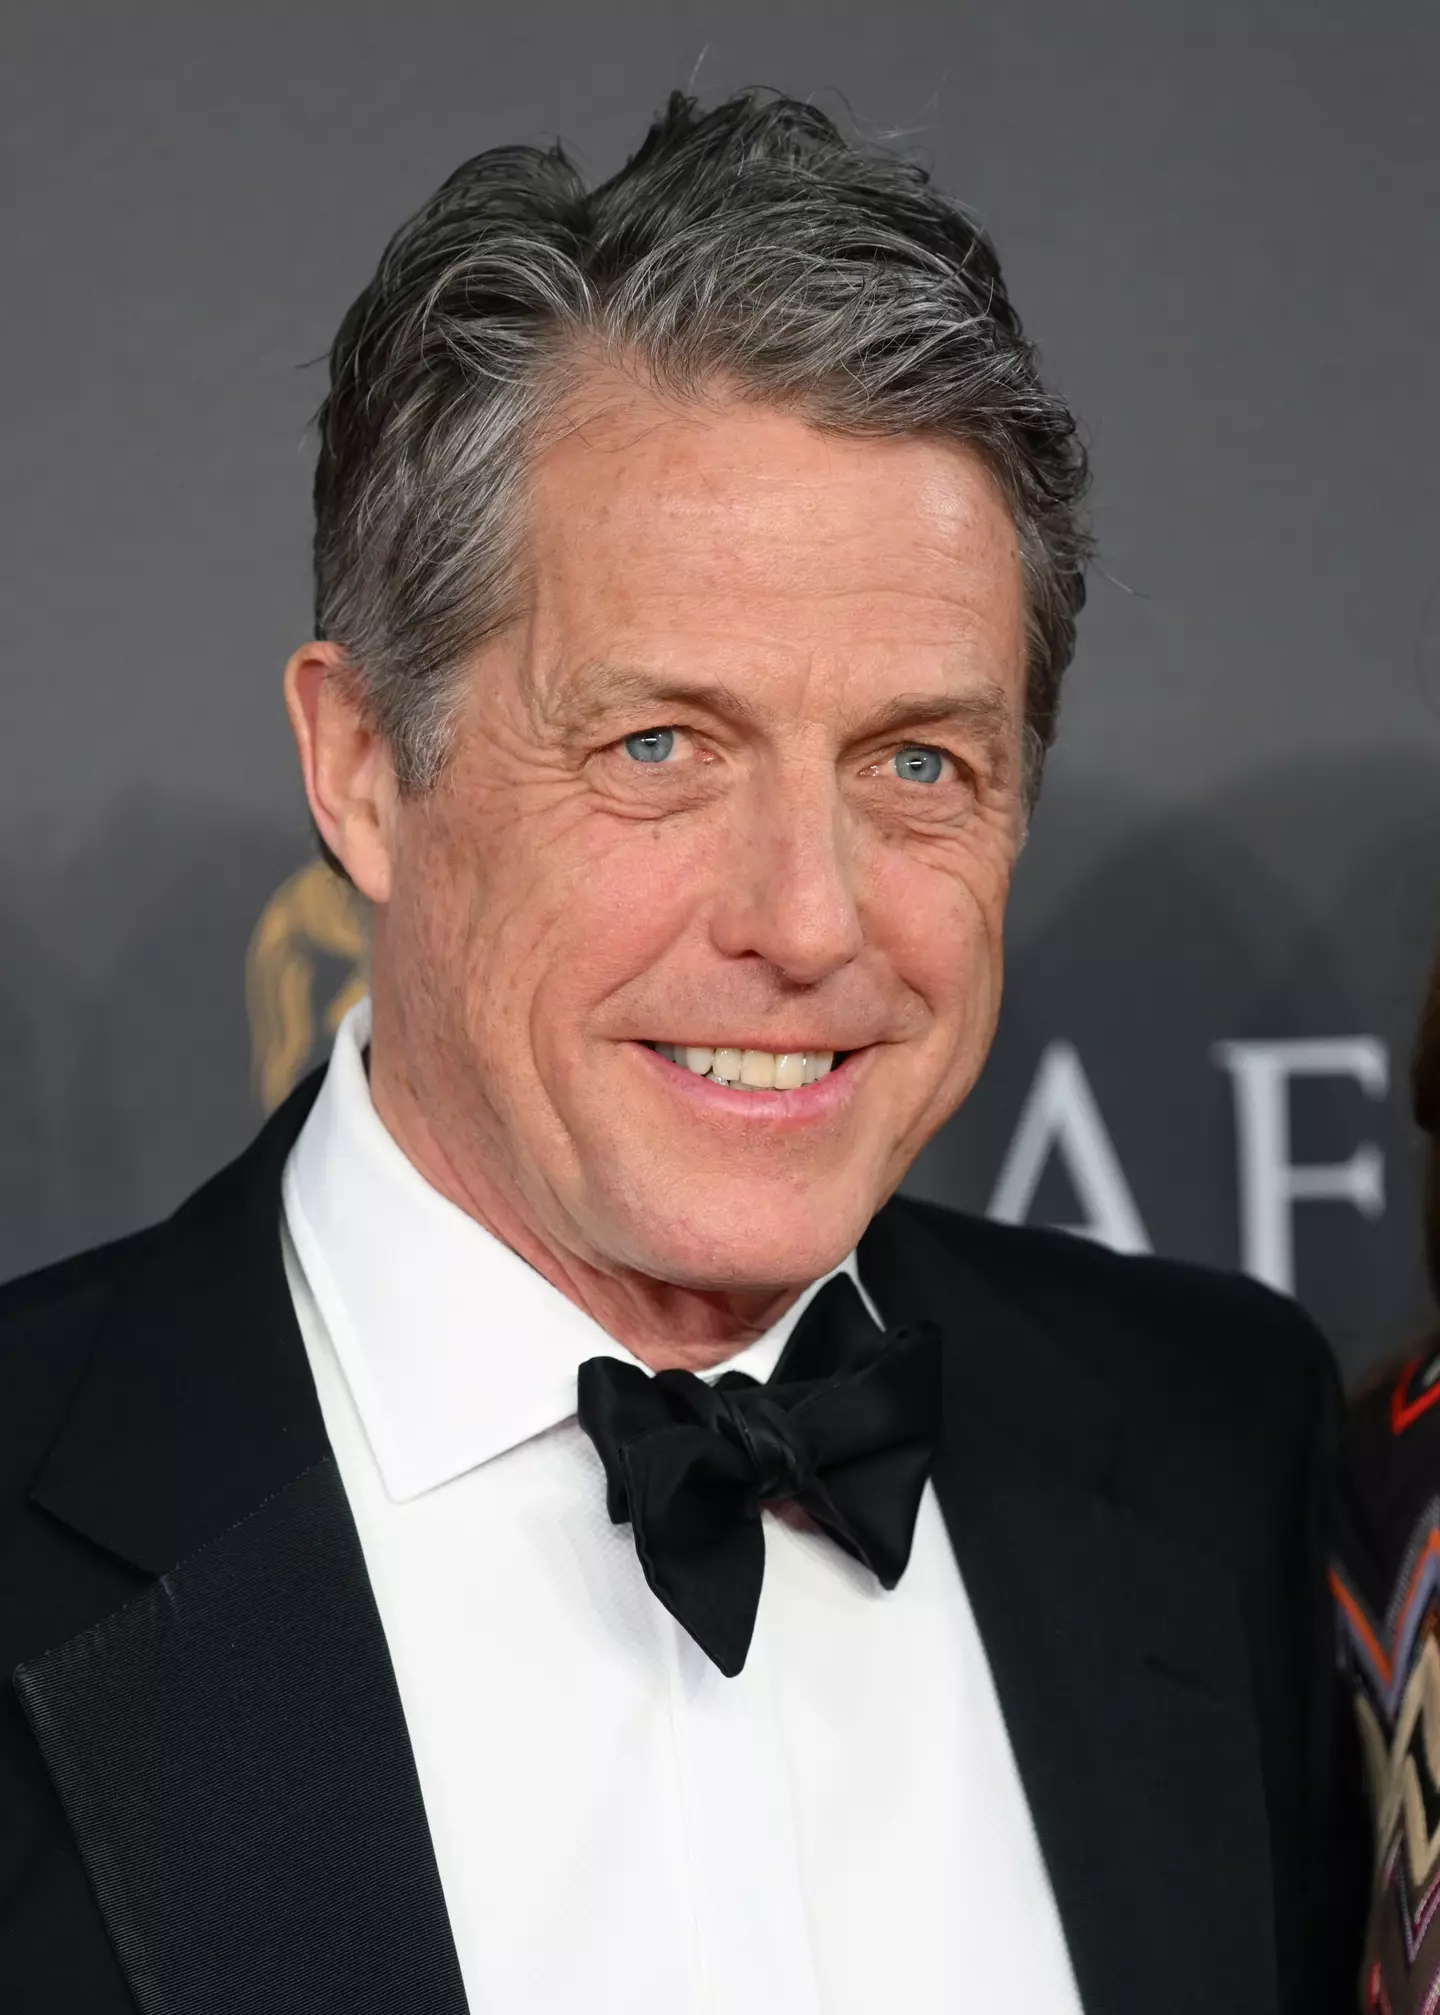 Hugh Grant is considering a career change.